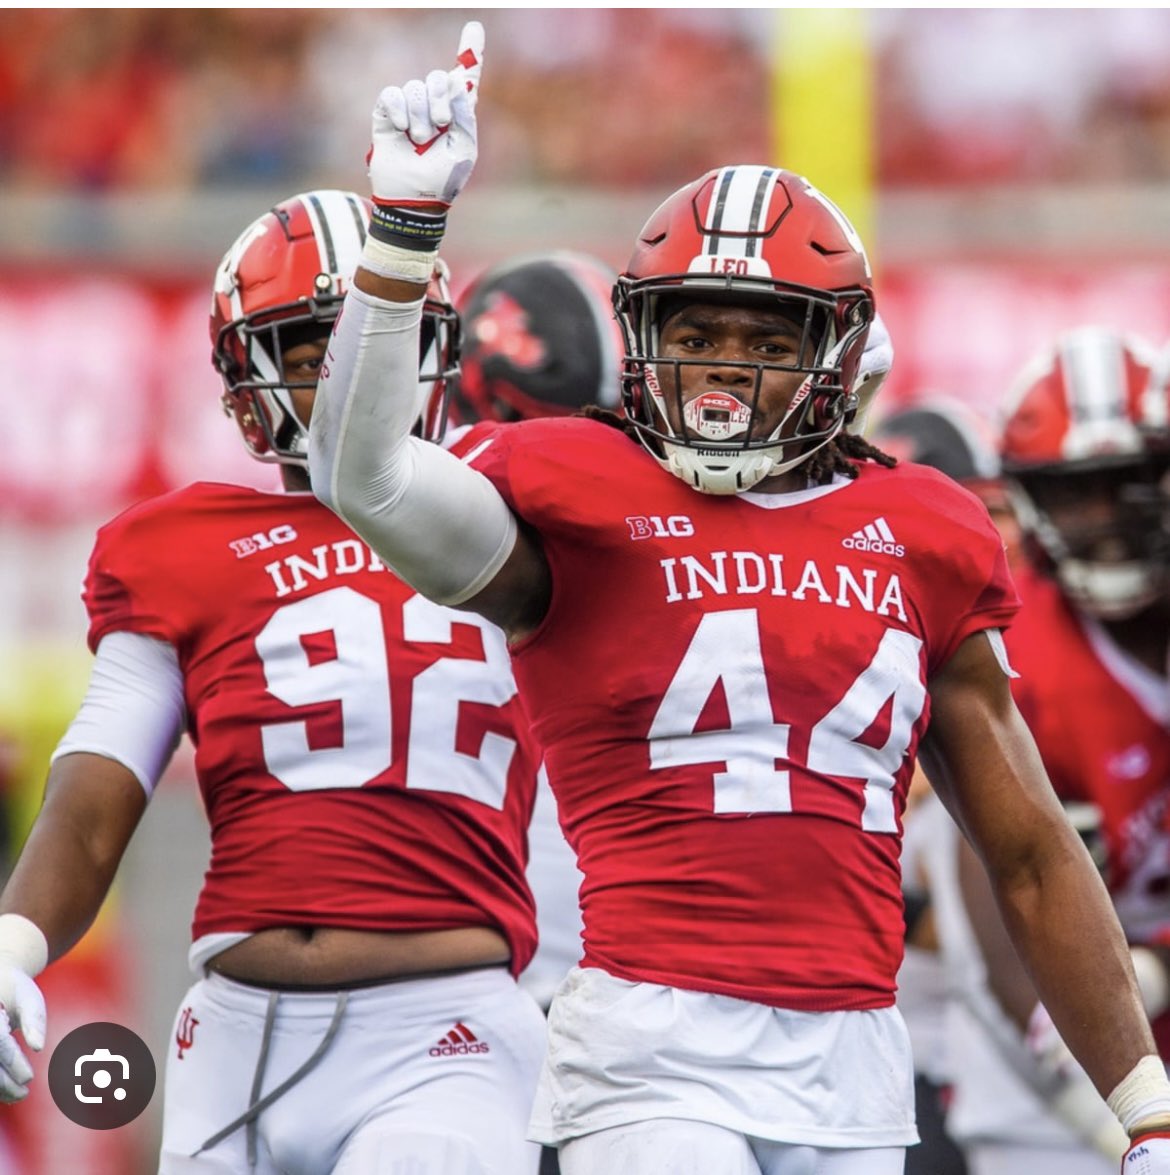 Blessed To Receive An Offer From @IndianaFootball @CCignettiIU @Coach_BHaines @coach_buddha @ScoutFball @GrindLab @JemisonJags @HallTechSports1 @DexPreps @TomLoy247 @SeanW_Rivals @SWiltfong_ @DownSouthFb1 @Andrew_Ivins @ChadSimmons_ @BHoward_11 @JohnGarcia_Jr @AL_Recruiting